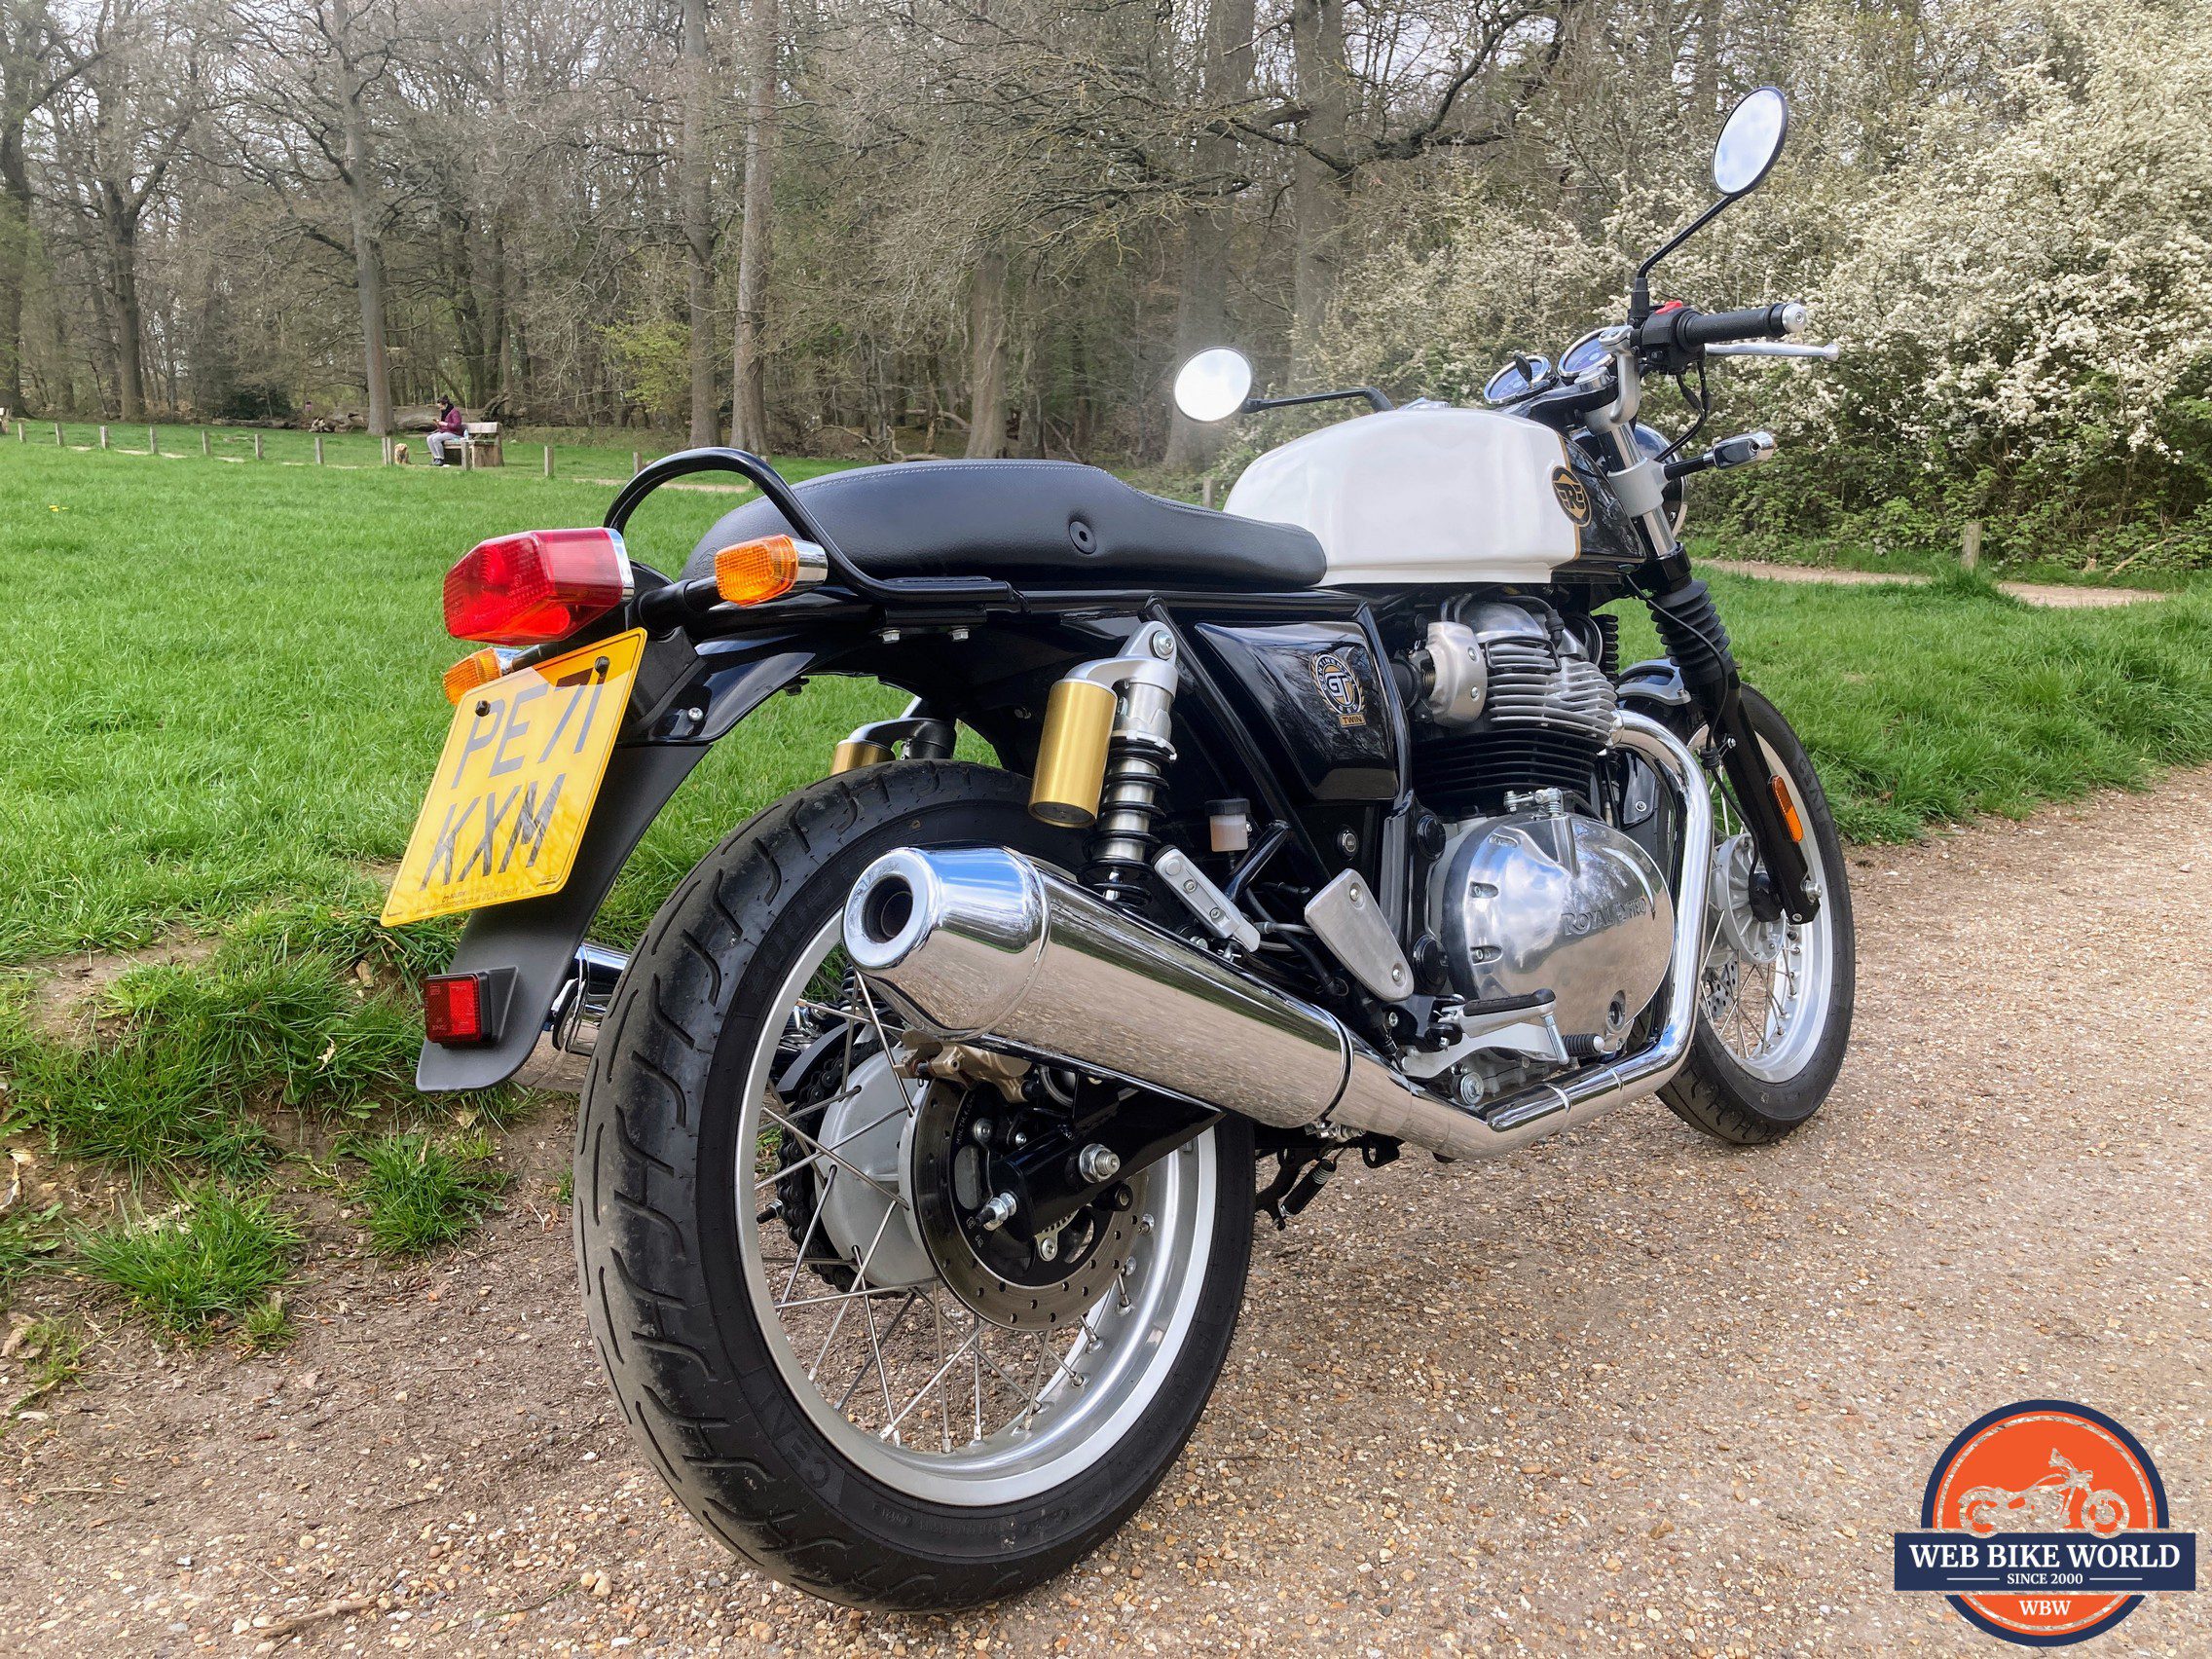 Rear view of the Royal Enfield Continental GT650